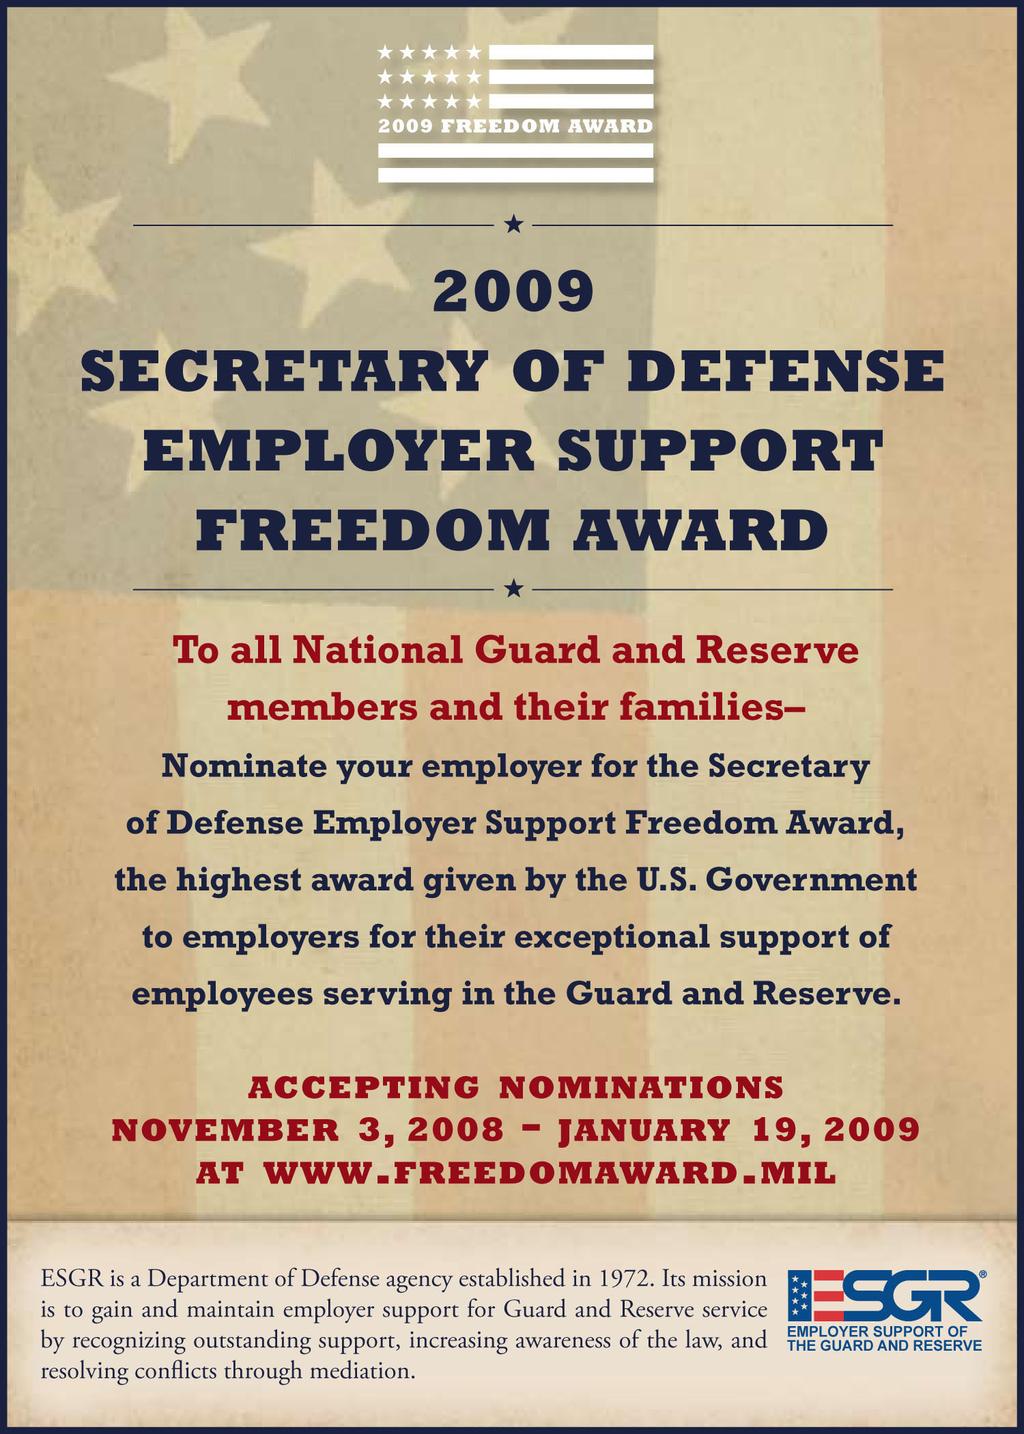 ARLINGTON, Va. -- Employer Support of the Guard and Reserve, a Department of Defense agency, has opened the nomination season for the 2009 Secretary of Defense Employer Support Freedom Award.